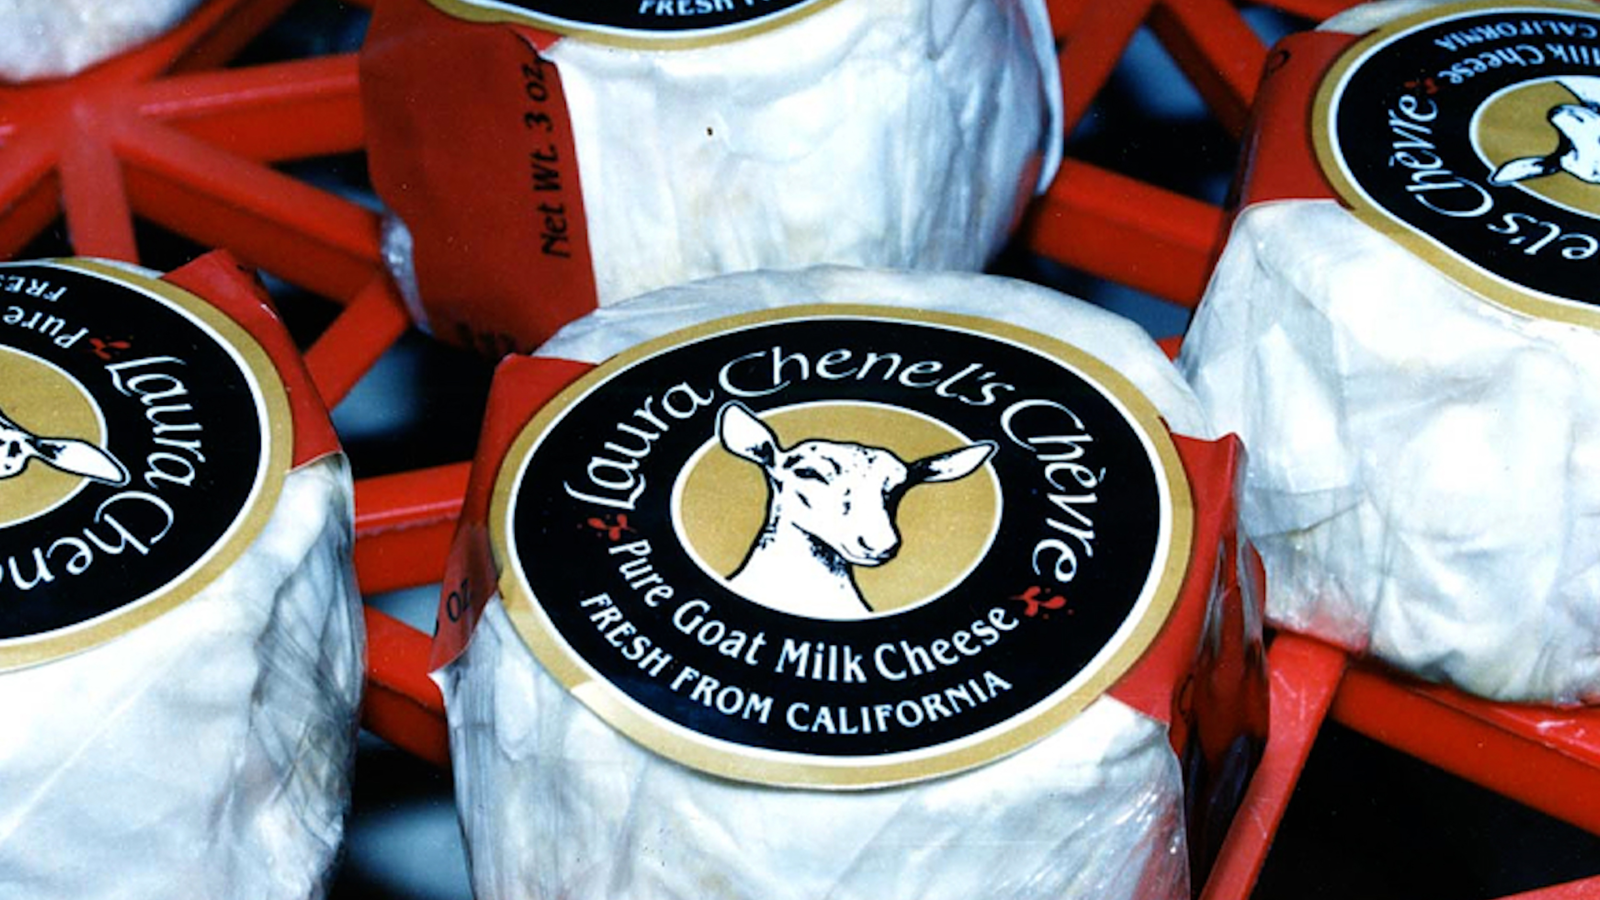 Sonoma-based creamery ‘Laura Chenel’ produces goat cheese goodness [Video]